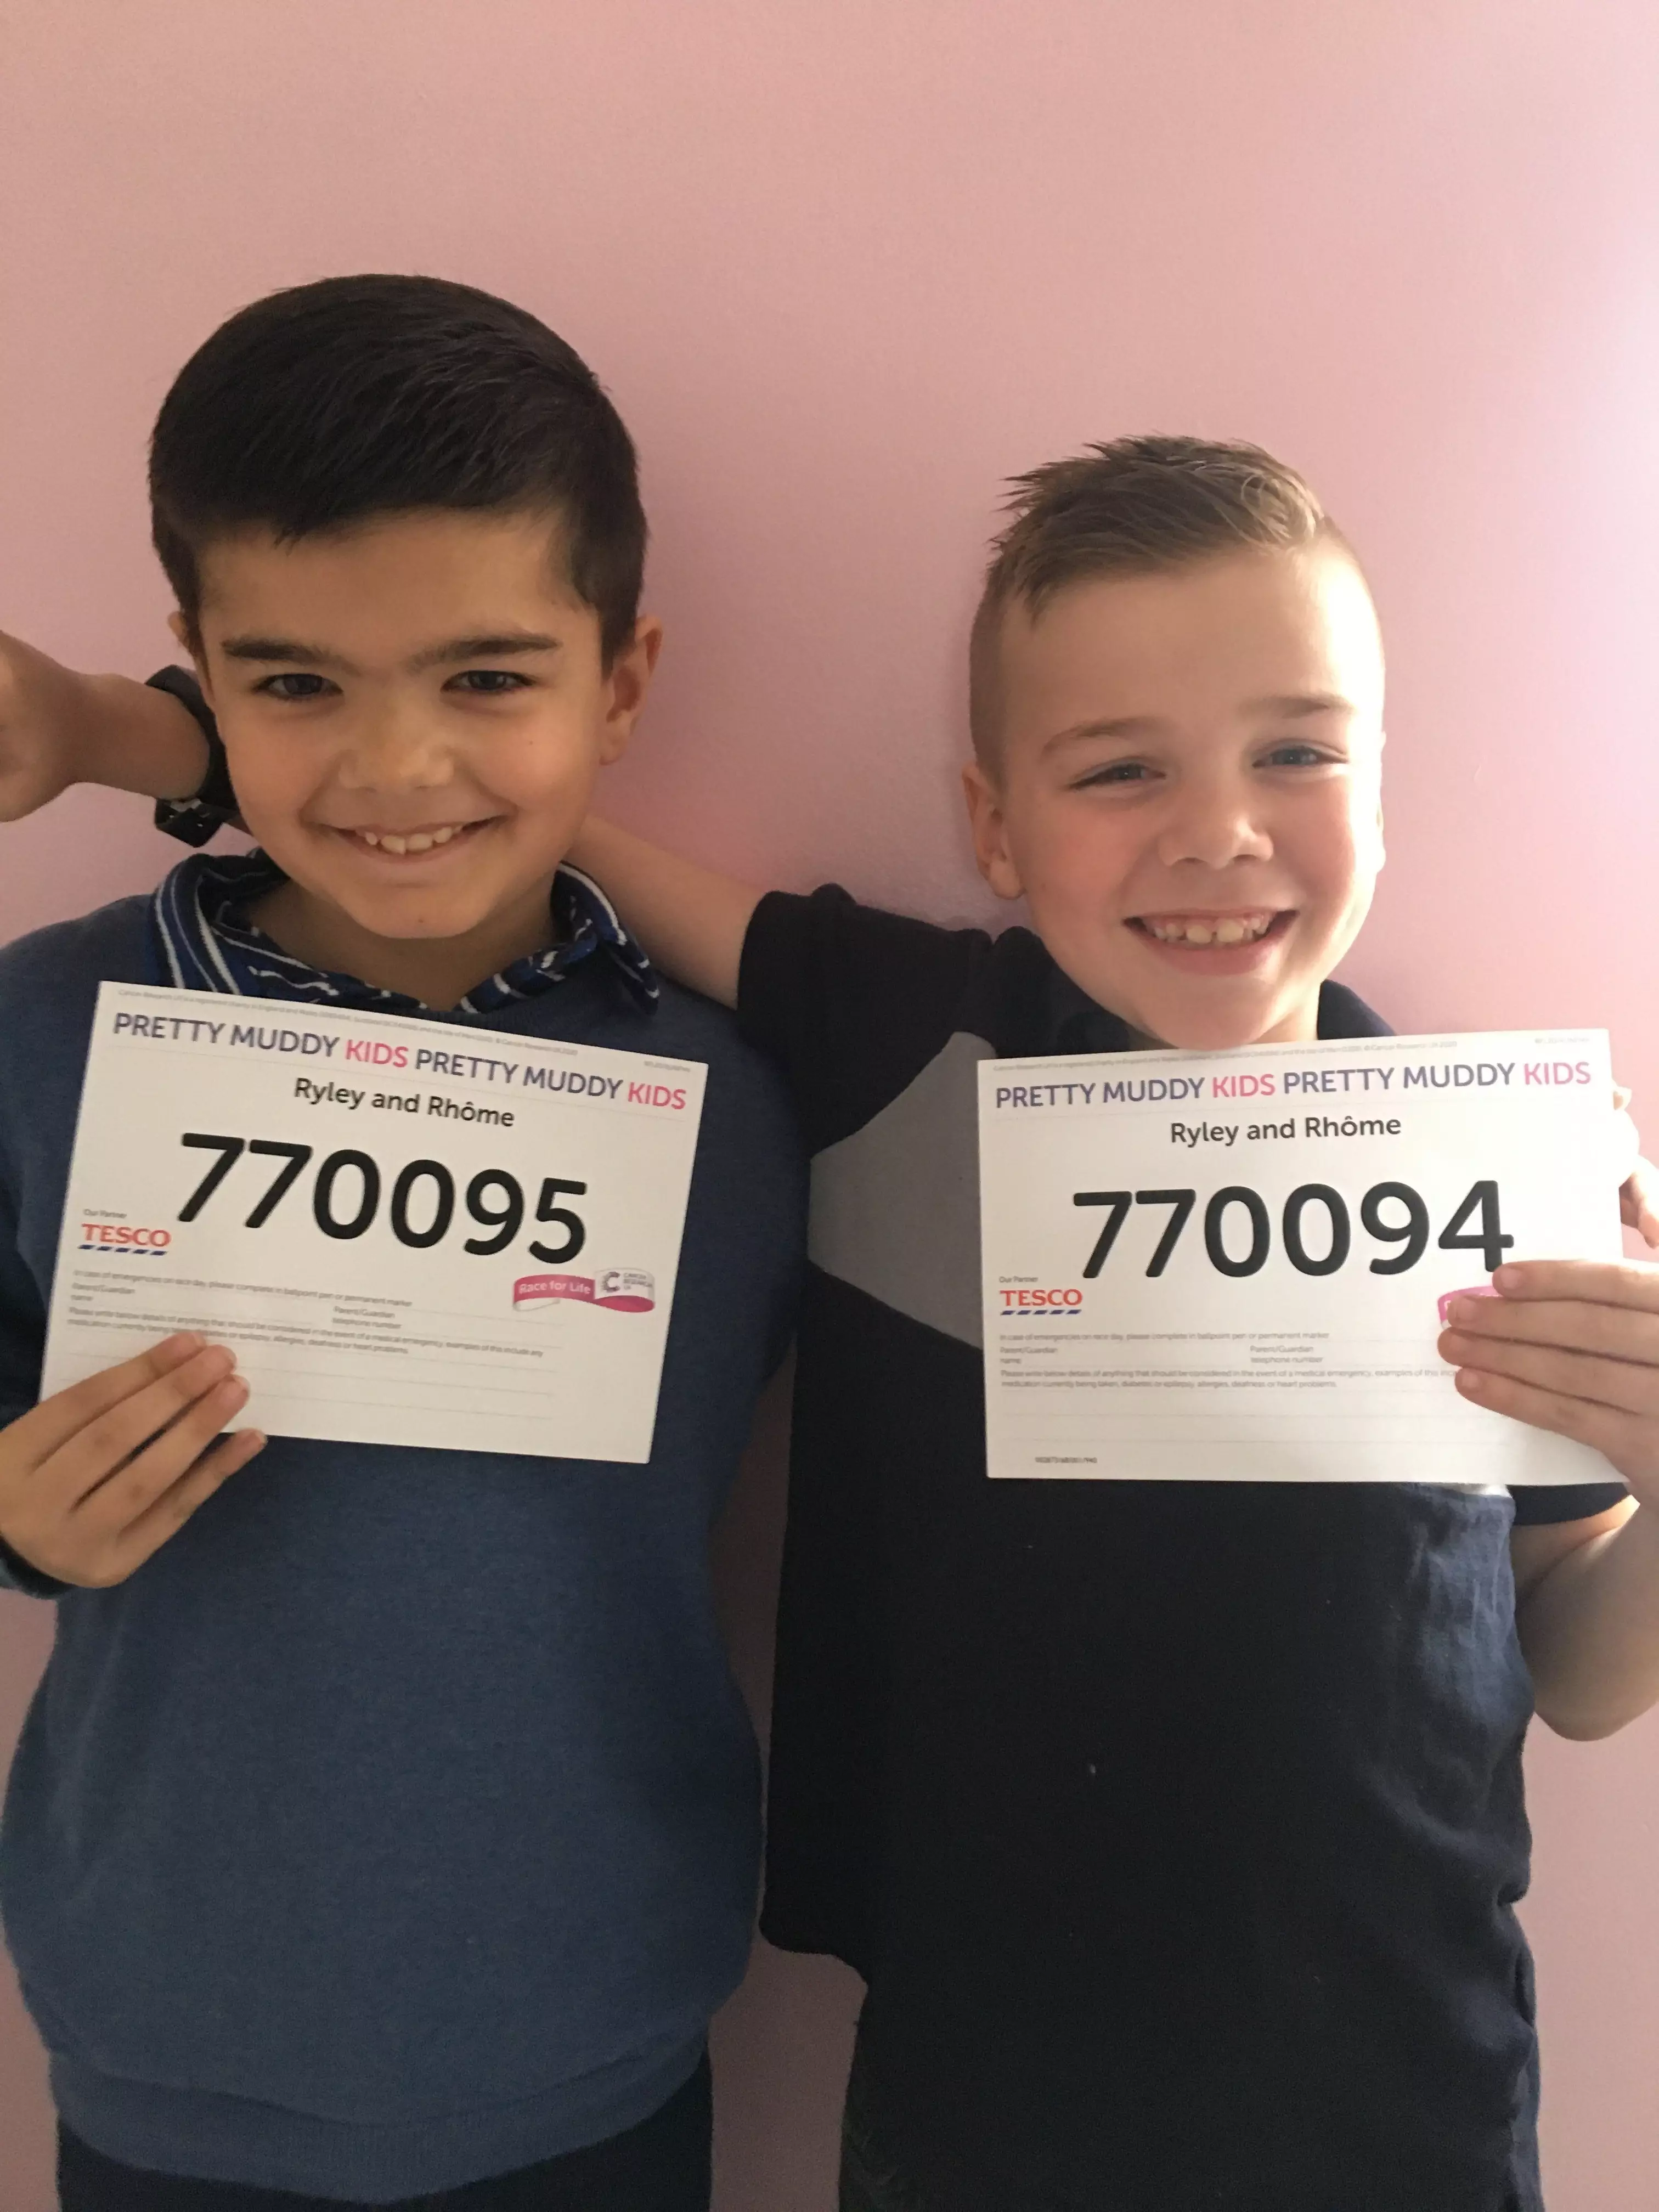 Rhome Pearce and Ryley Bahara have signed up to do the kids Pretty Muddy for Cancer Research.